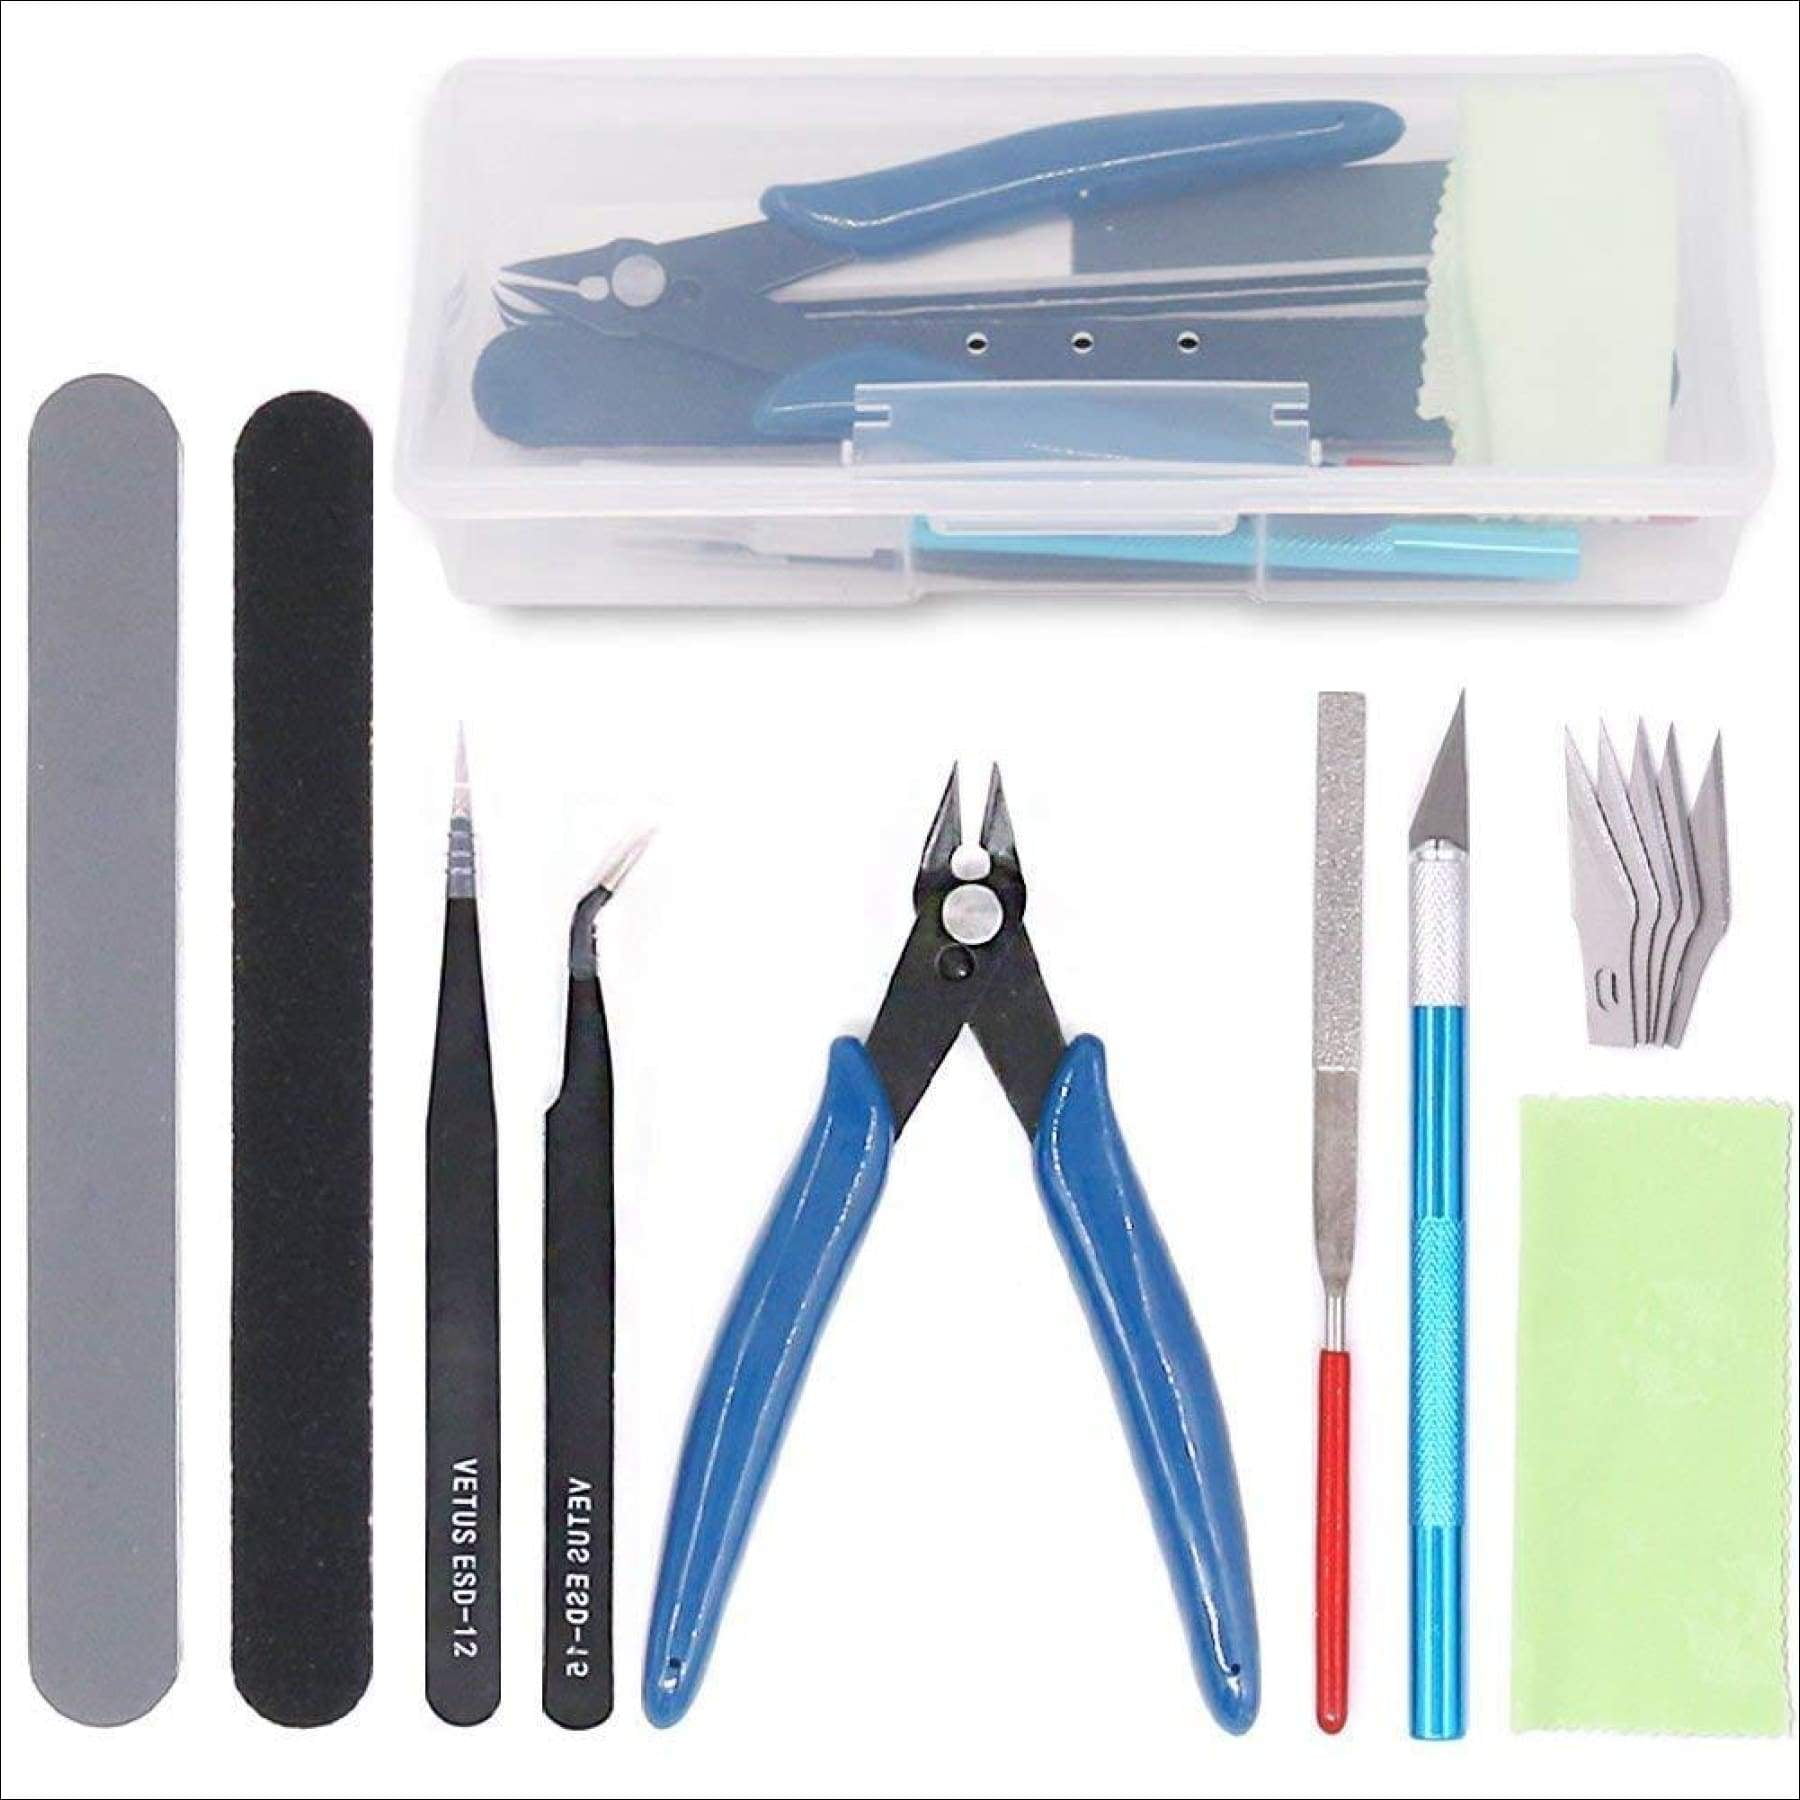  Keadic 29Pcs Gundam Modeler Basic Tools Craft Set with a  Plastic Case and Bag for Hobby Model Assemble Building : Arts, Crafts &  Sewing